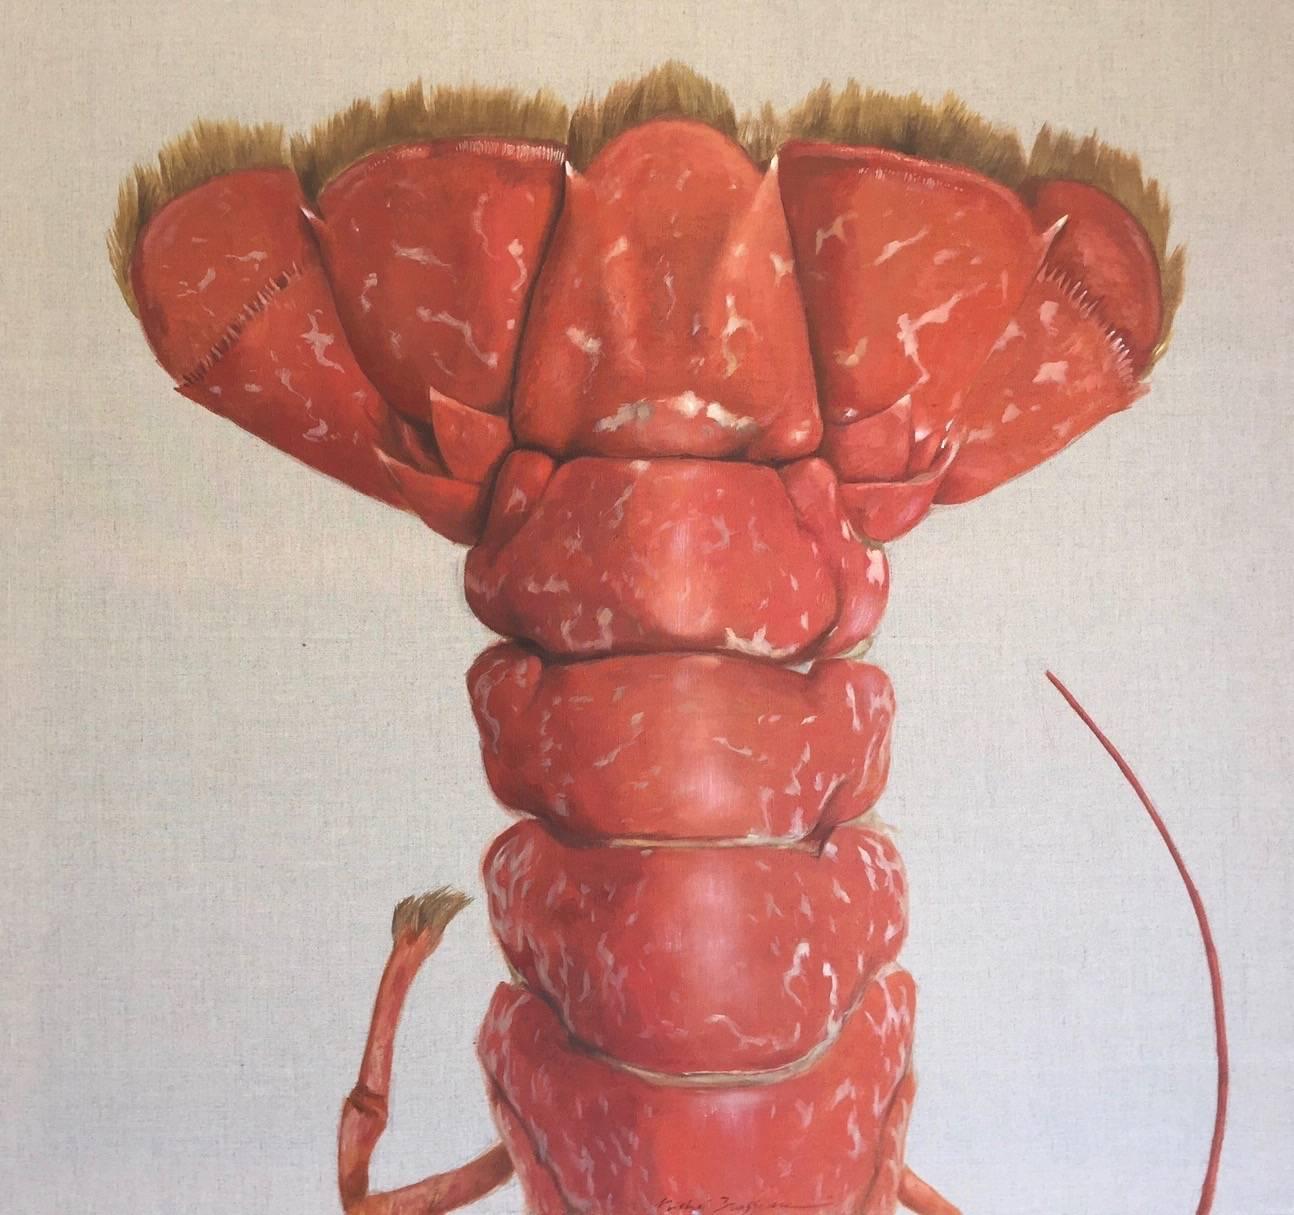 Michel Brosseau Animal Painting - "La Queue" Red Lobster Tail Painted on Exposed Linen